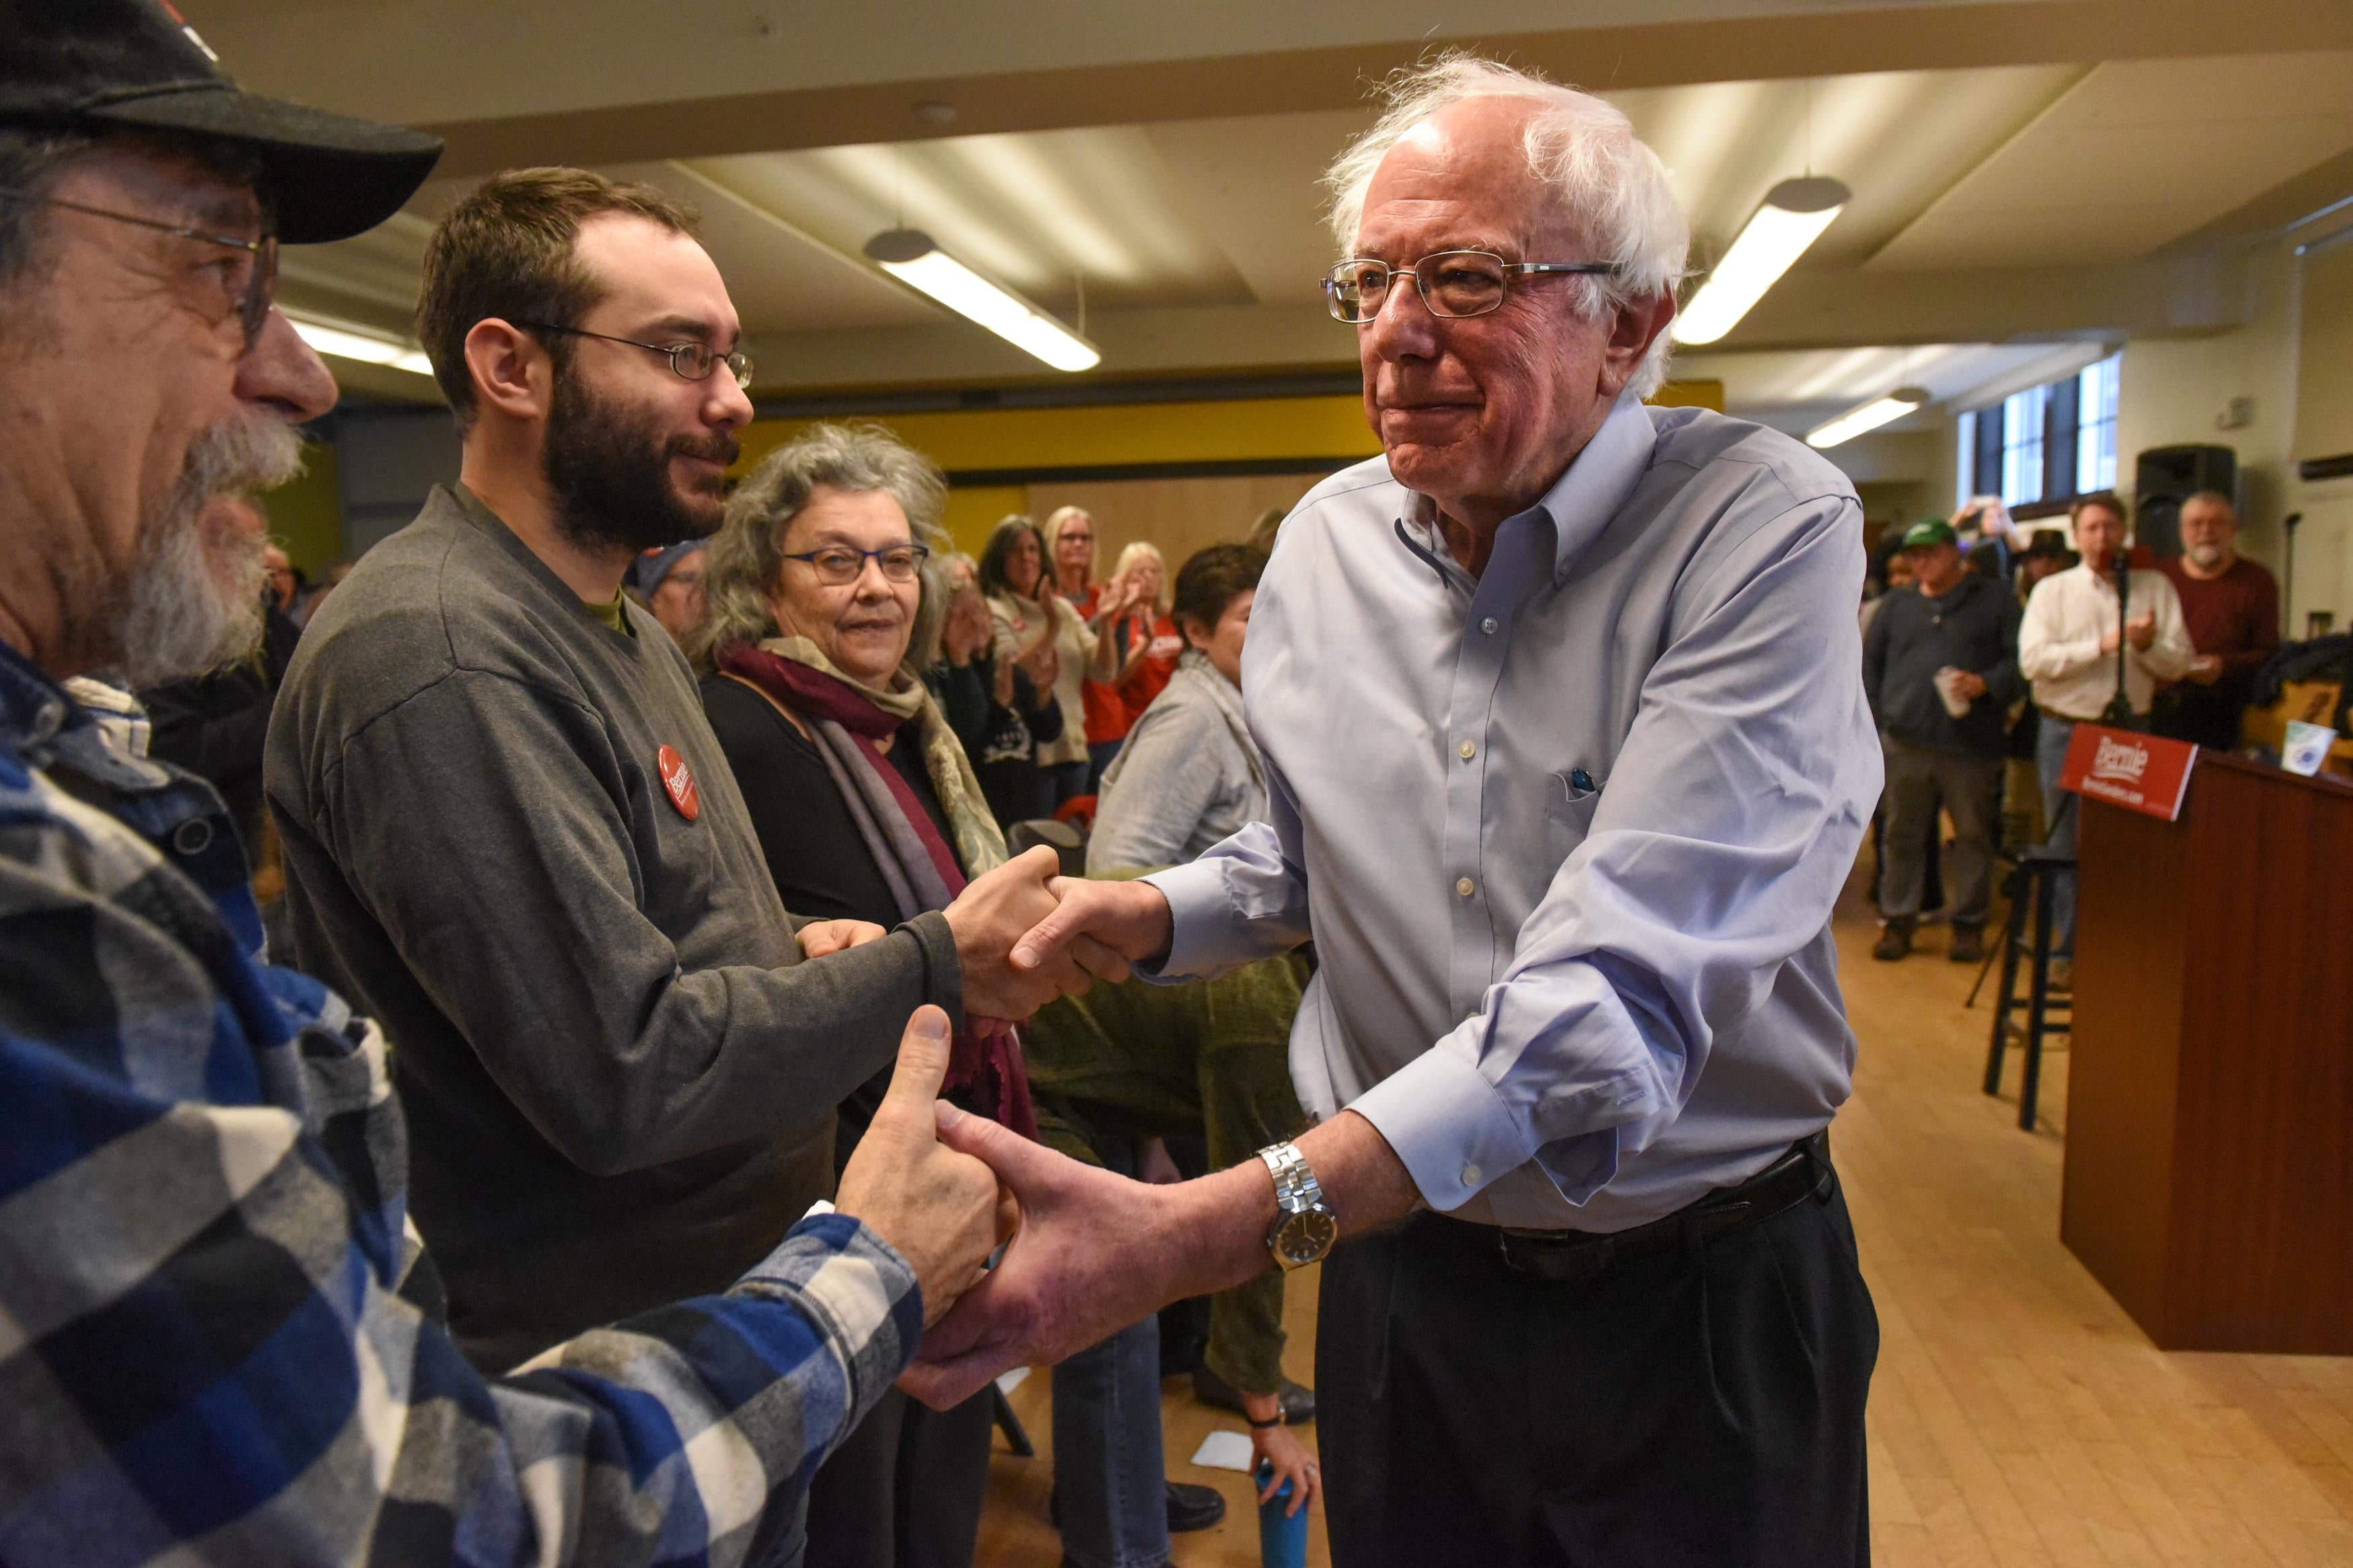 Sen. Bernie Sanders shakes hands with supporters at a campaign event in Vermont in November 2018.